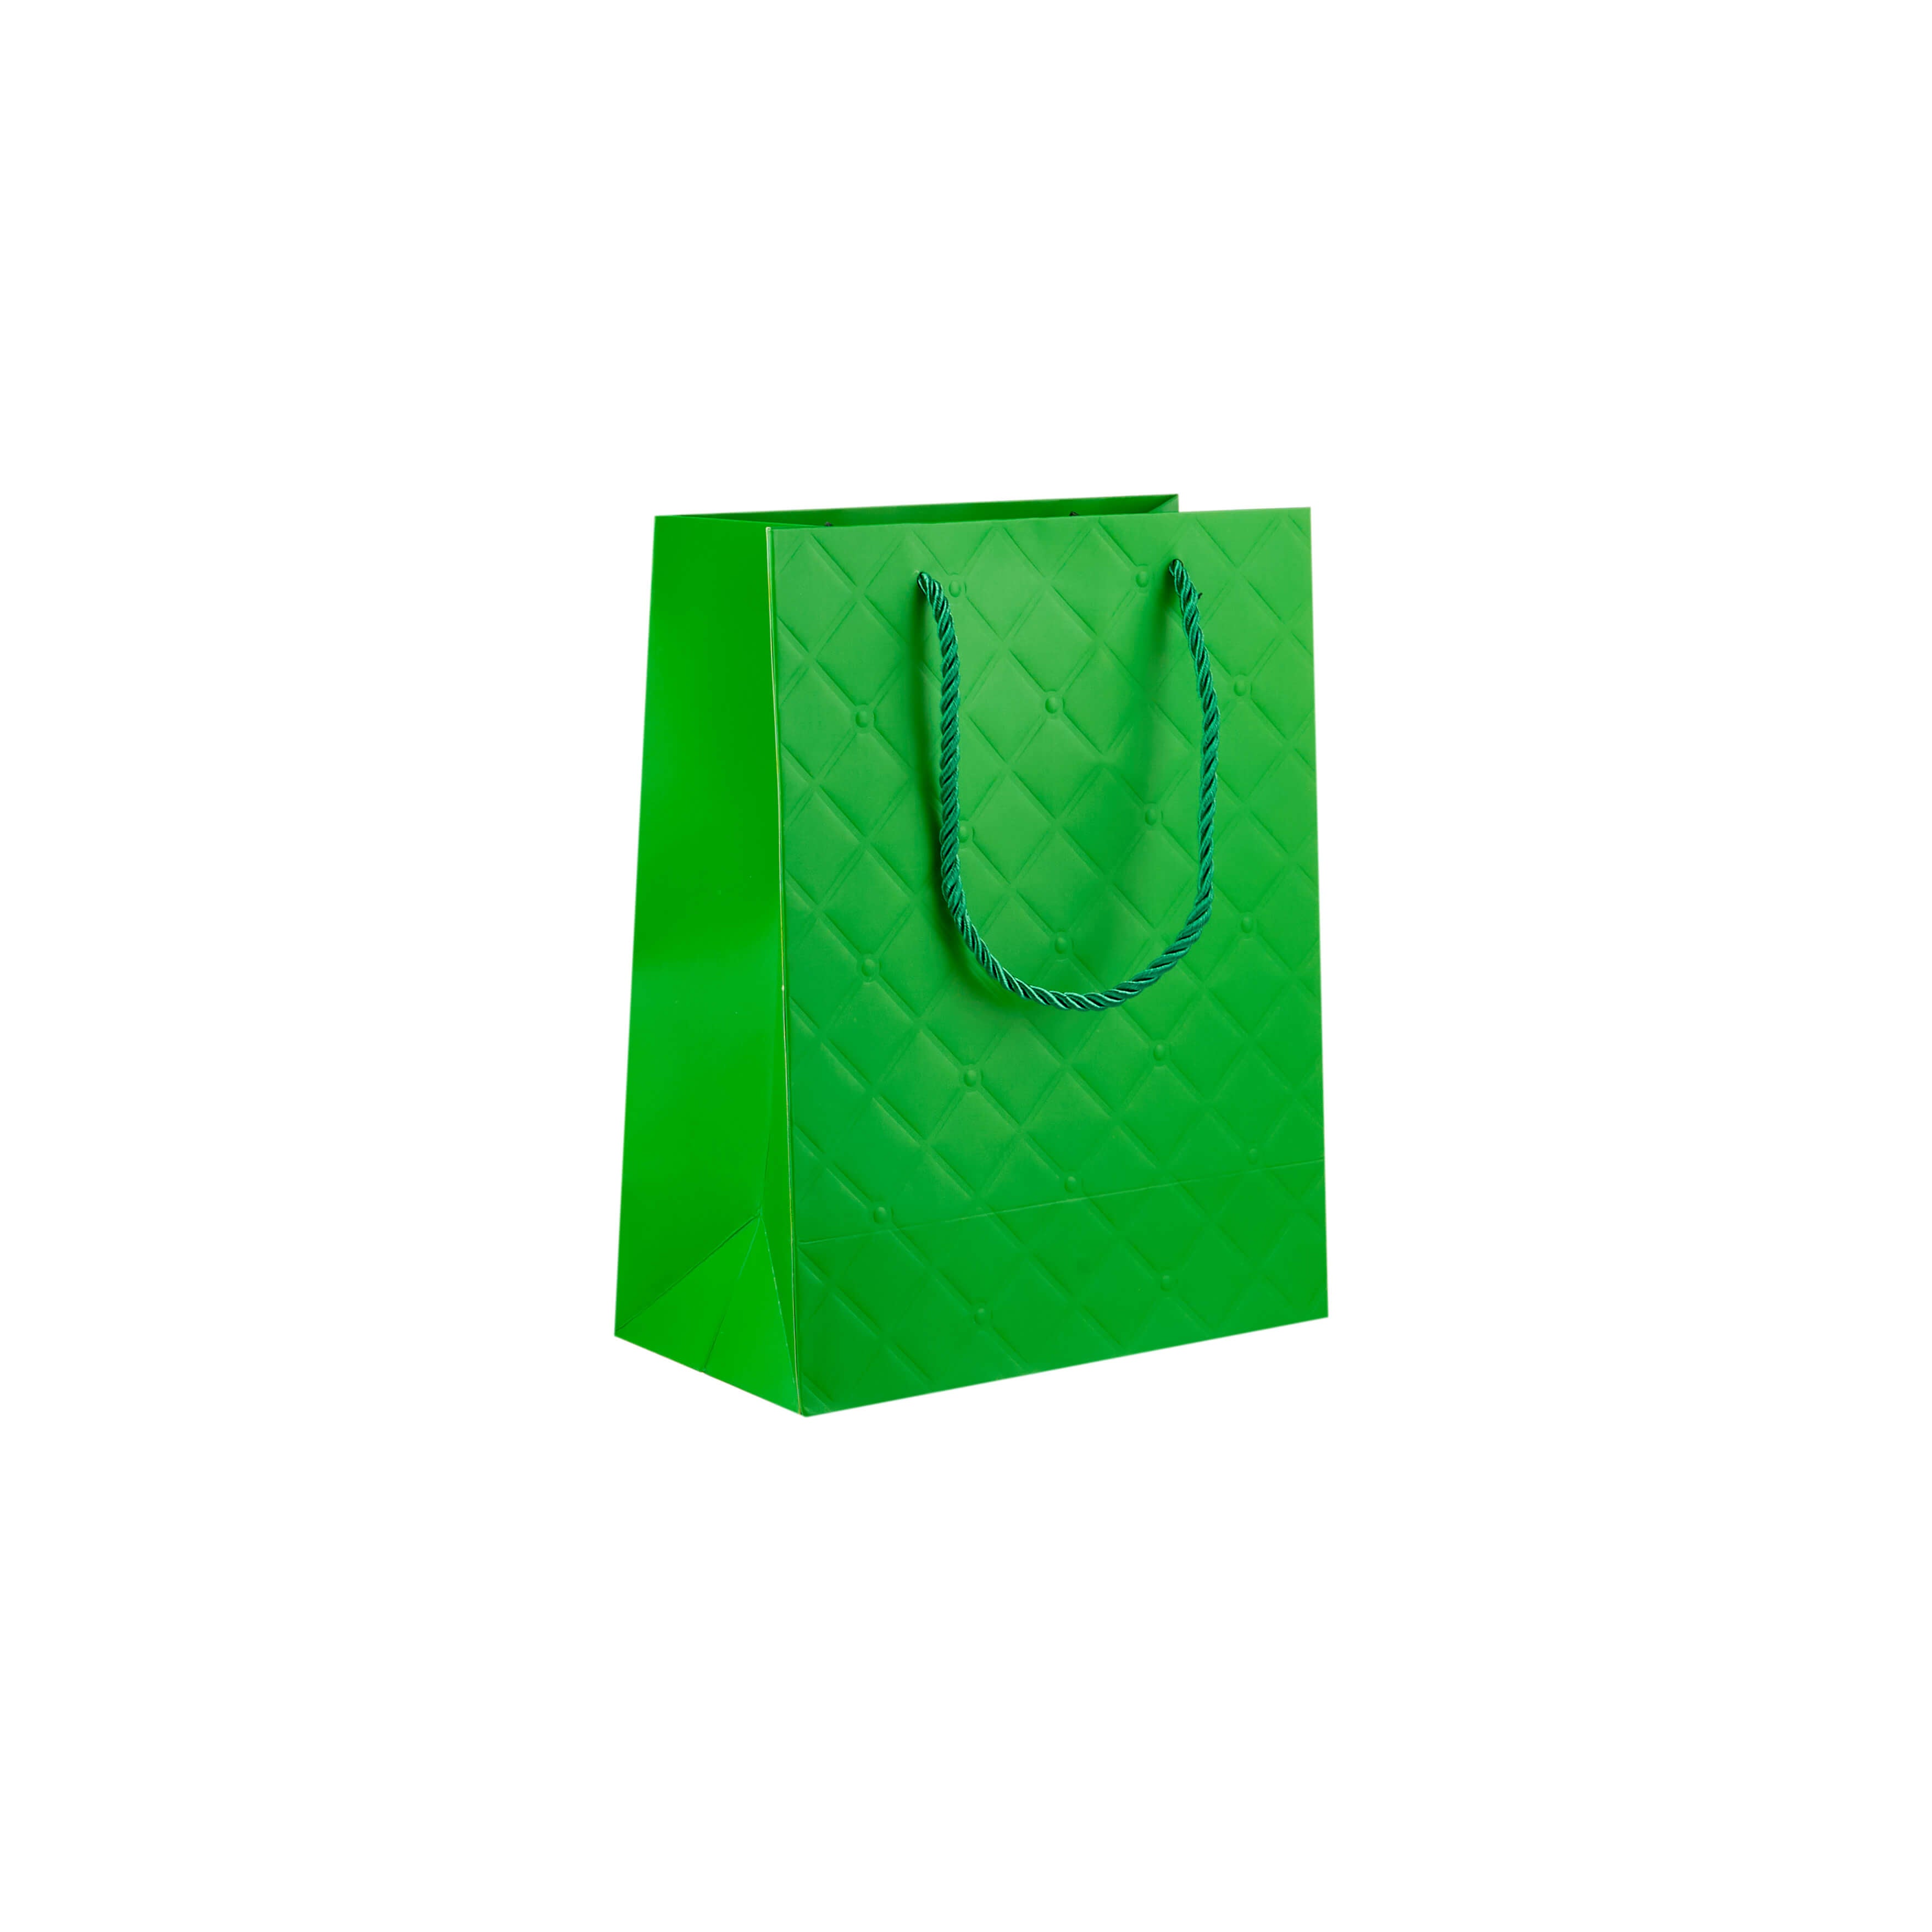 Wholesale custom design printing gift shopping packaging quality dark green  luxury boutique paper bags with your own logo From m.alibaba.com